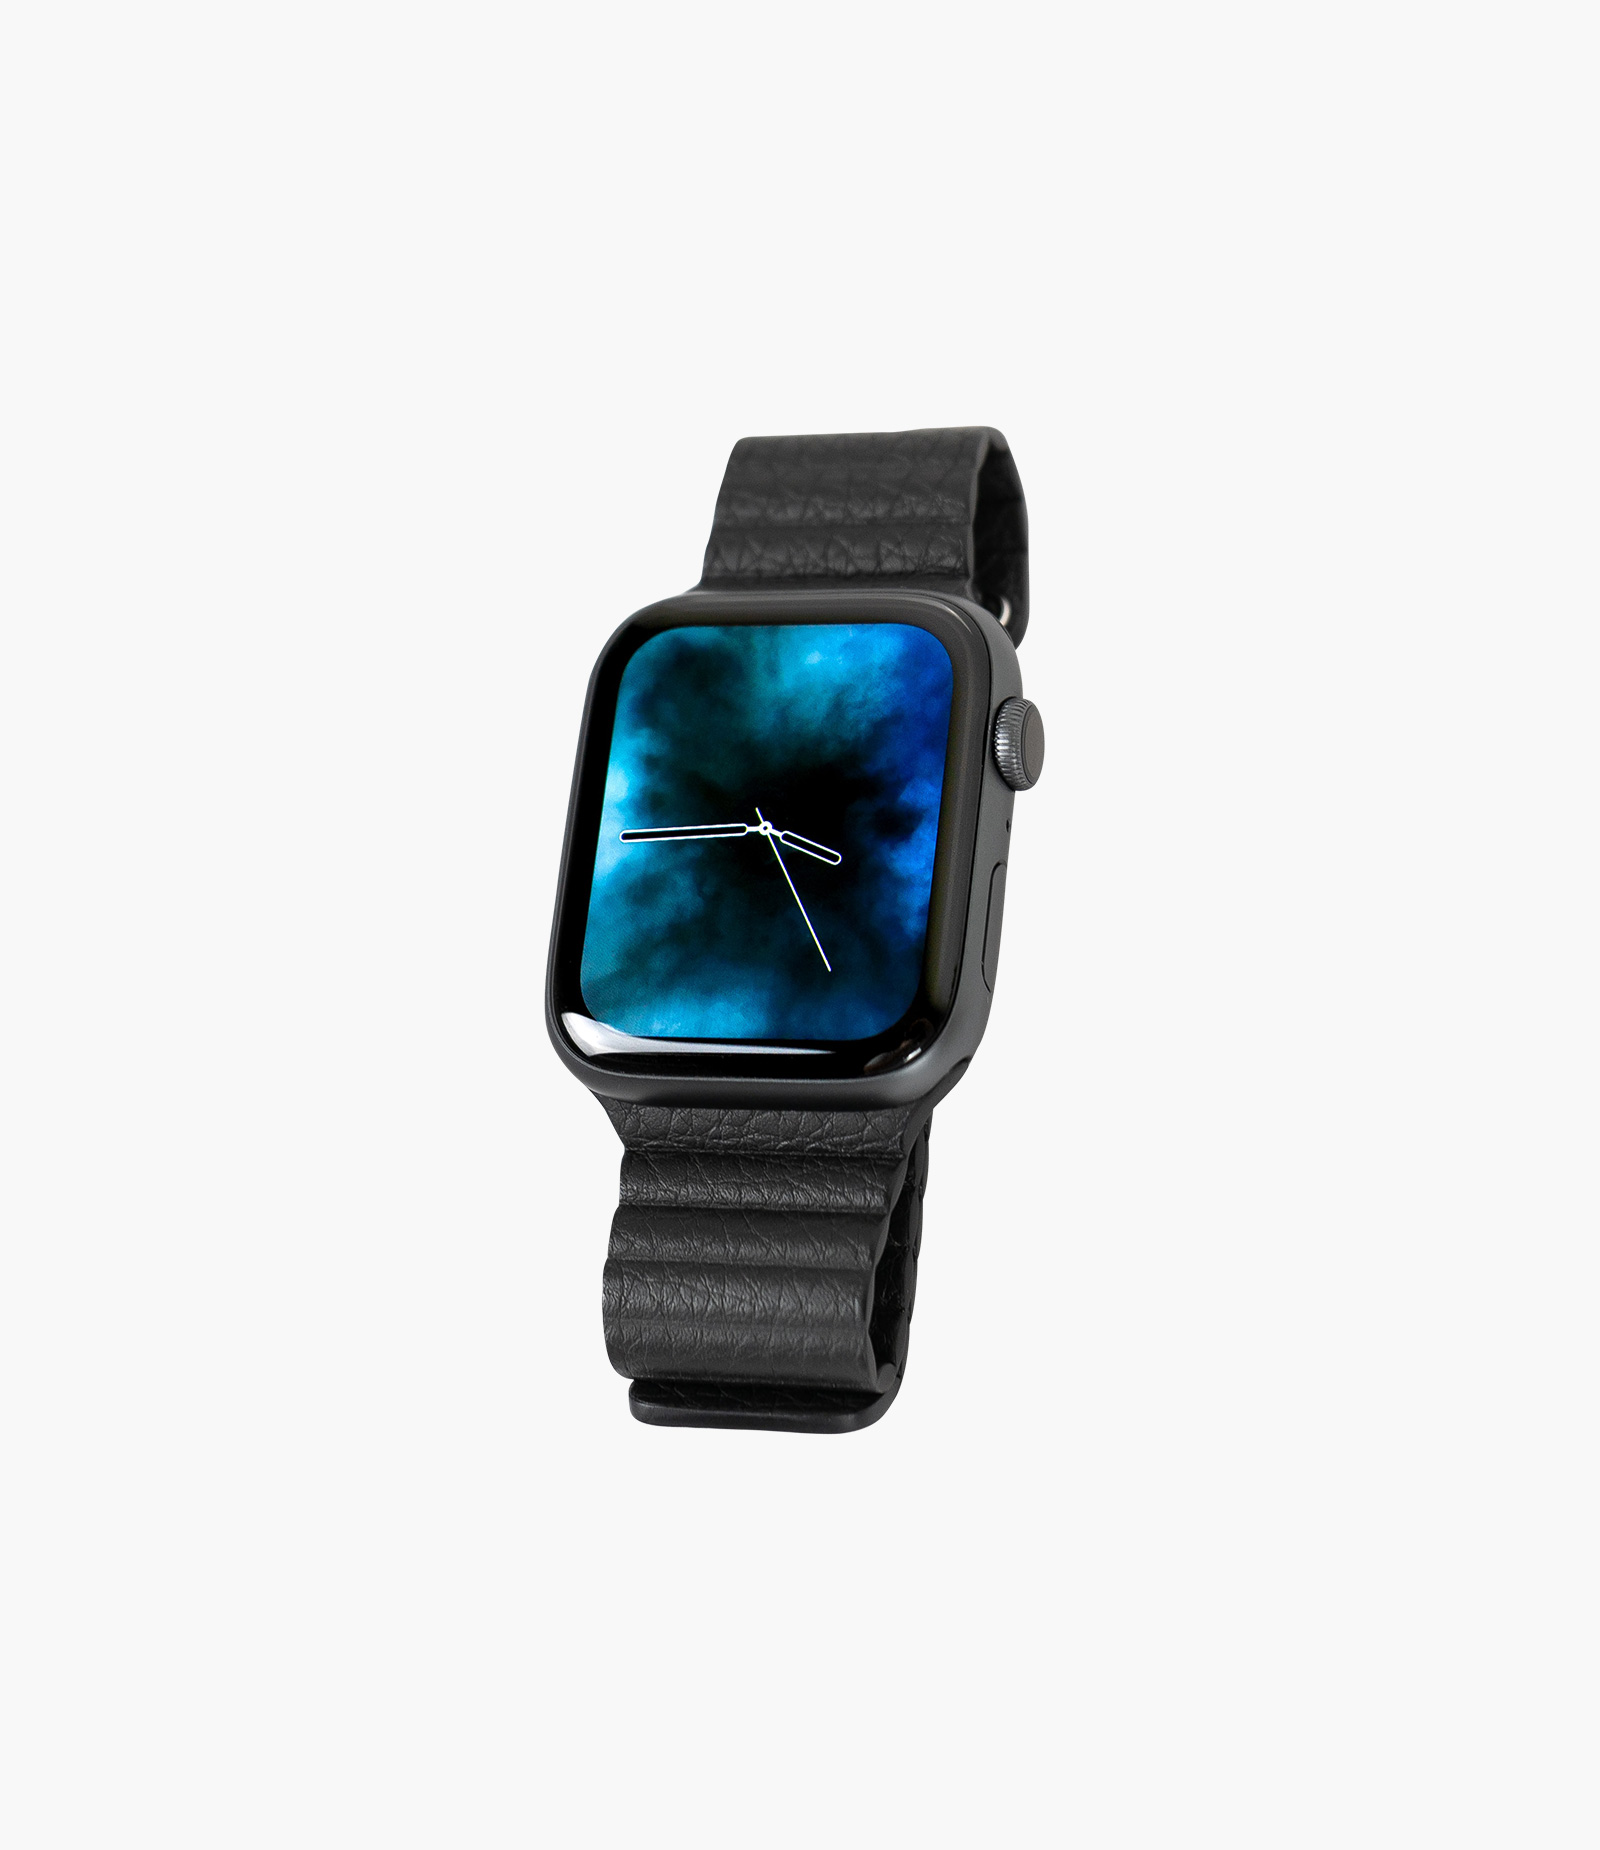 Apple Watch Series 4 Space Gray Aluminum Case with Leather Loop